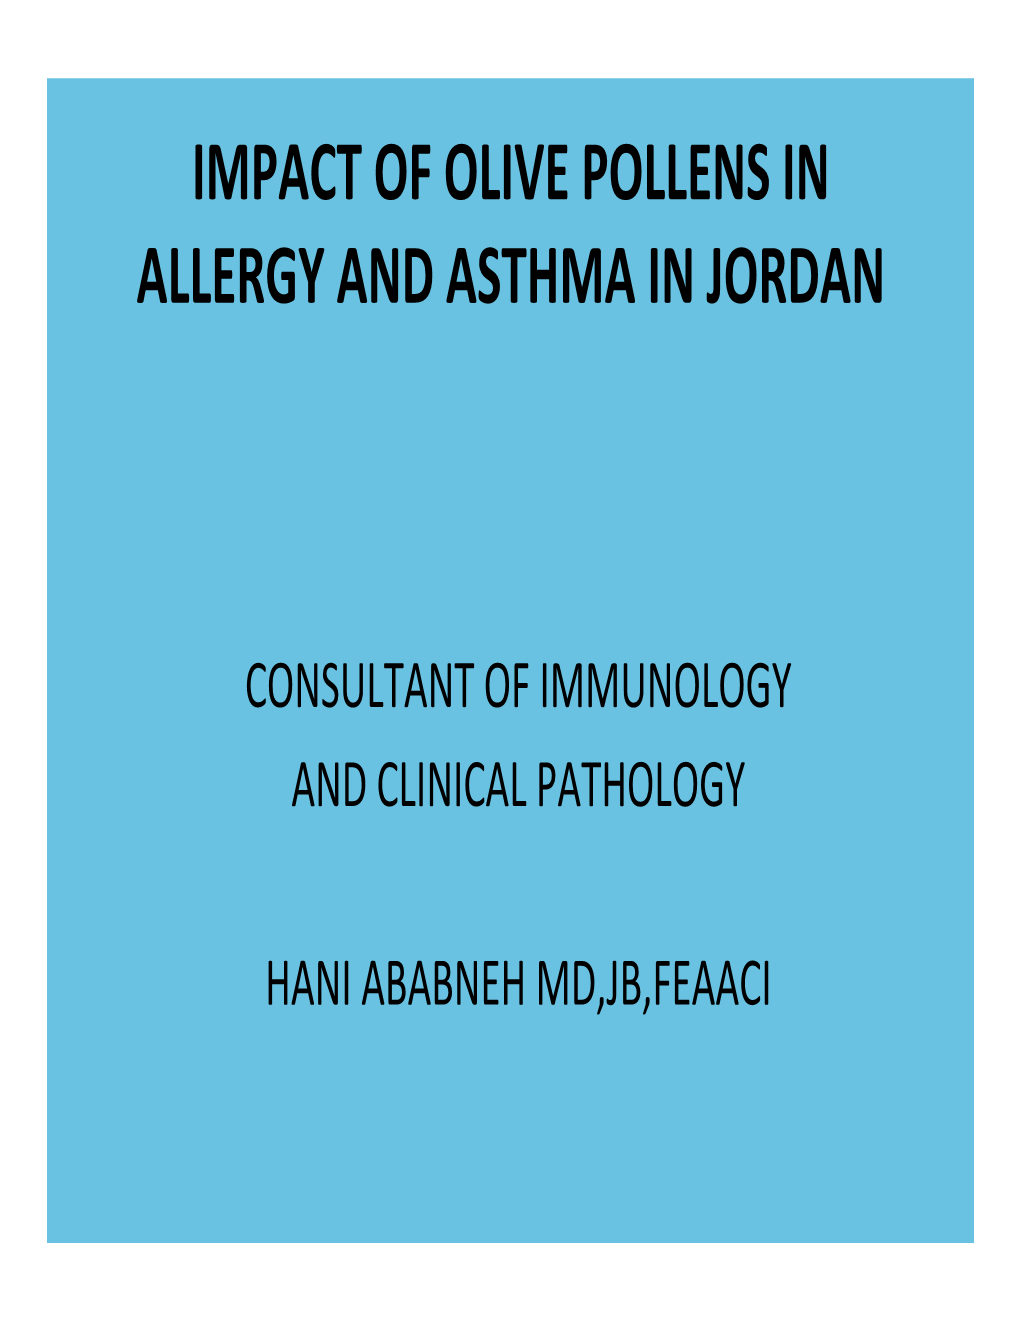 Impact of Olive Pollens in Allergy and Asthma in Jordan